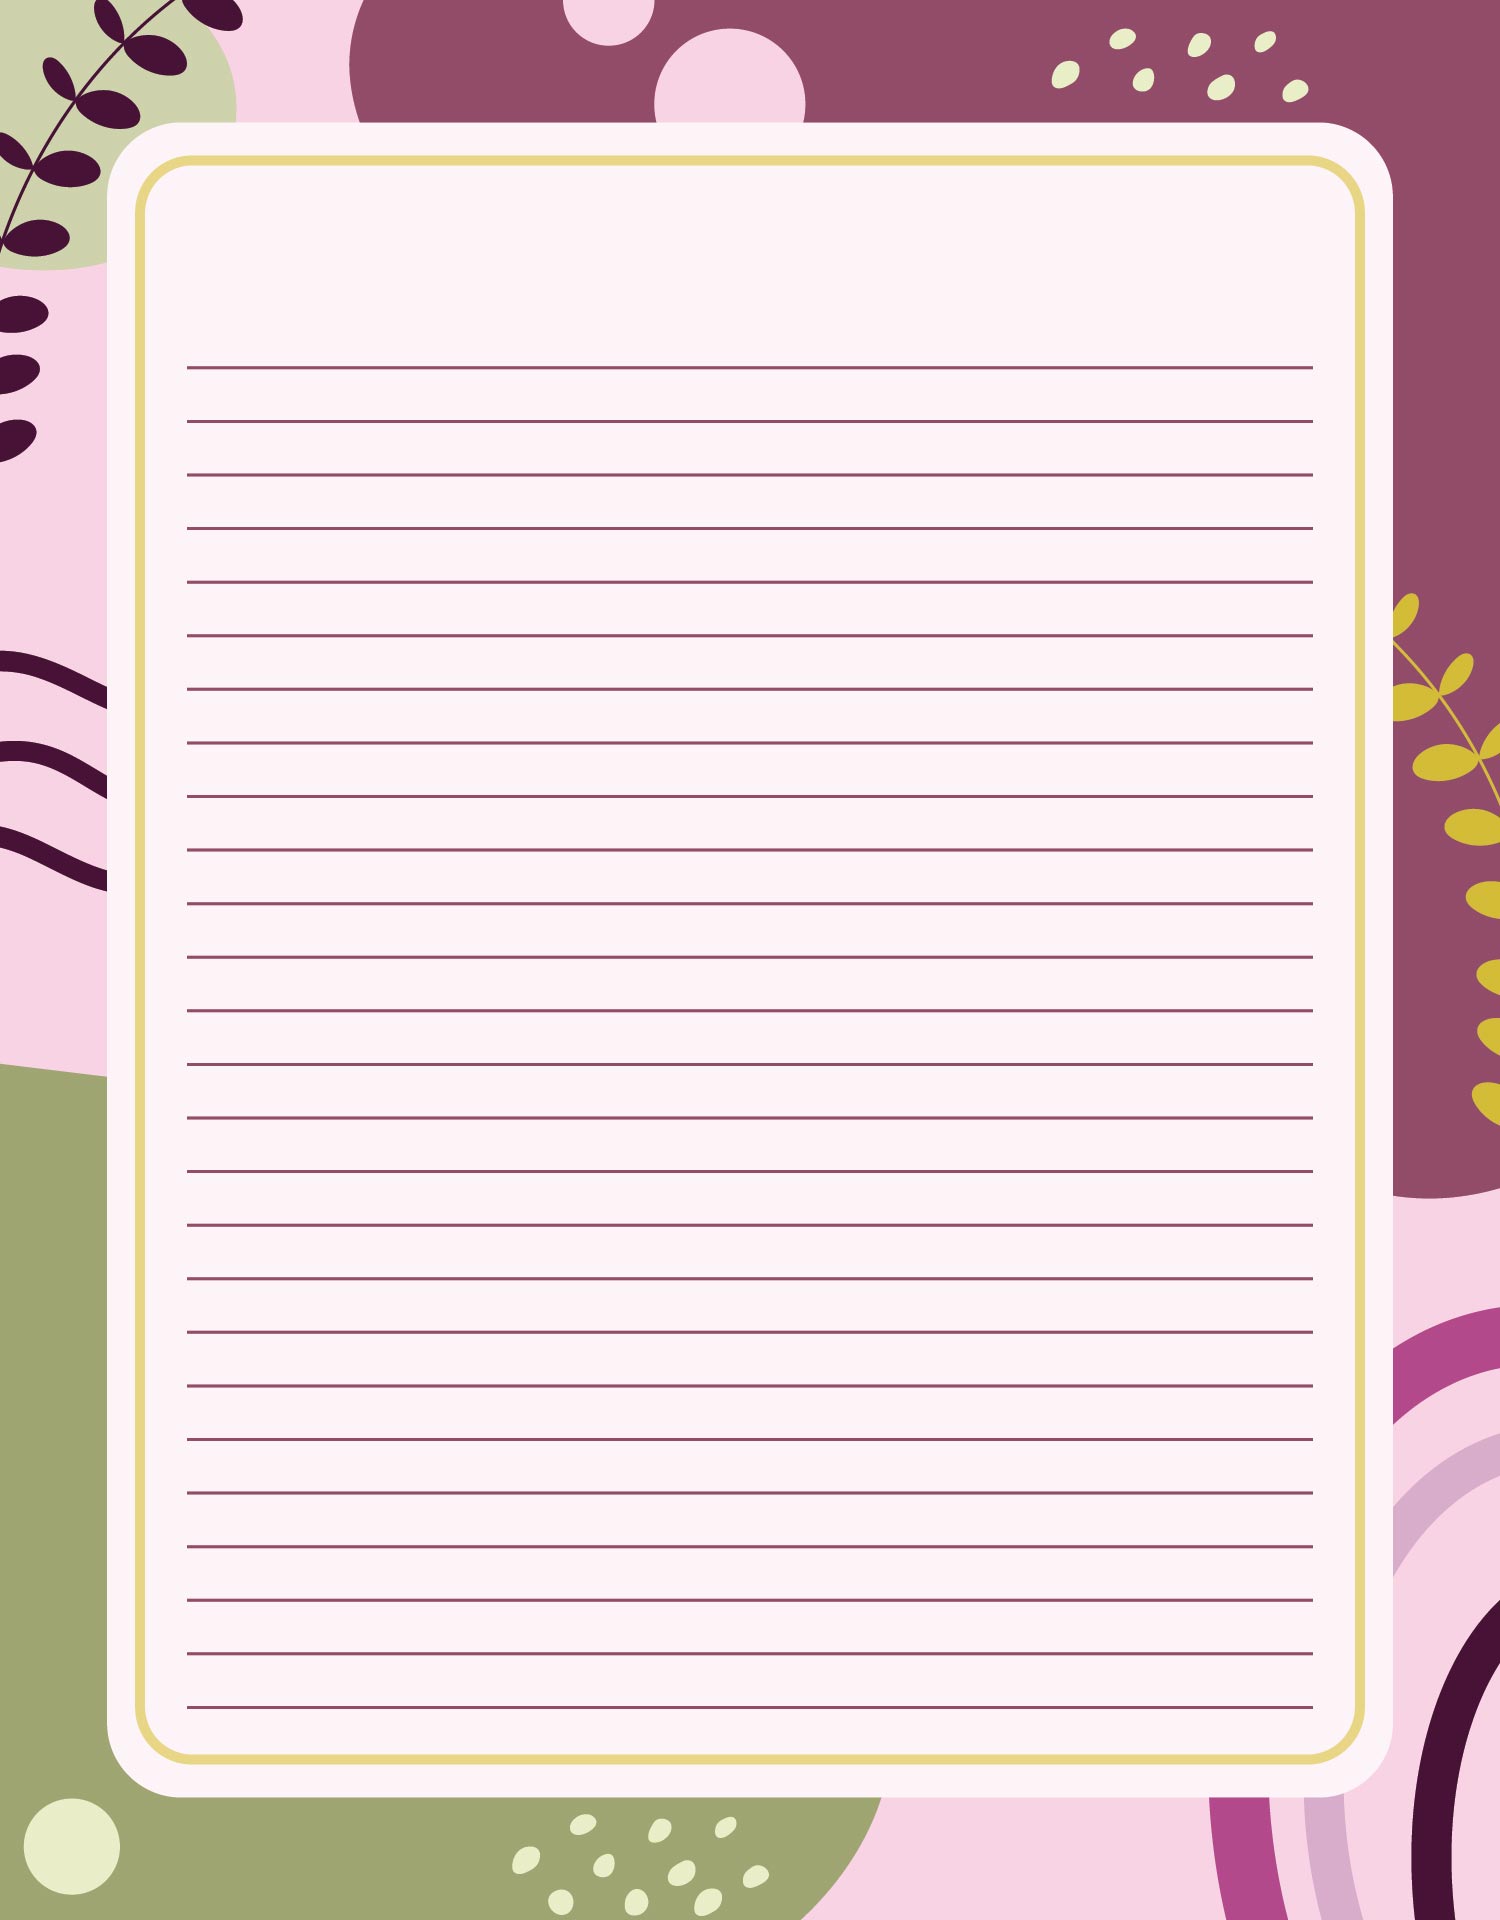 Printable Writing Paper With Lines And Border - Get What You Need For Free